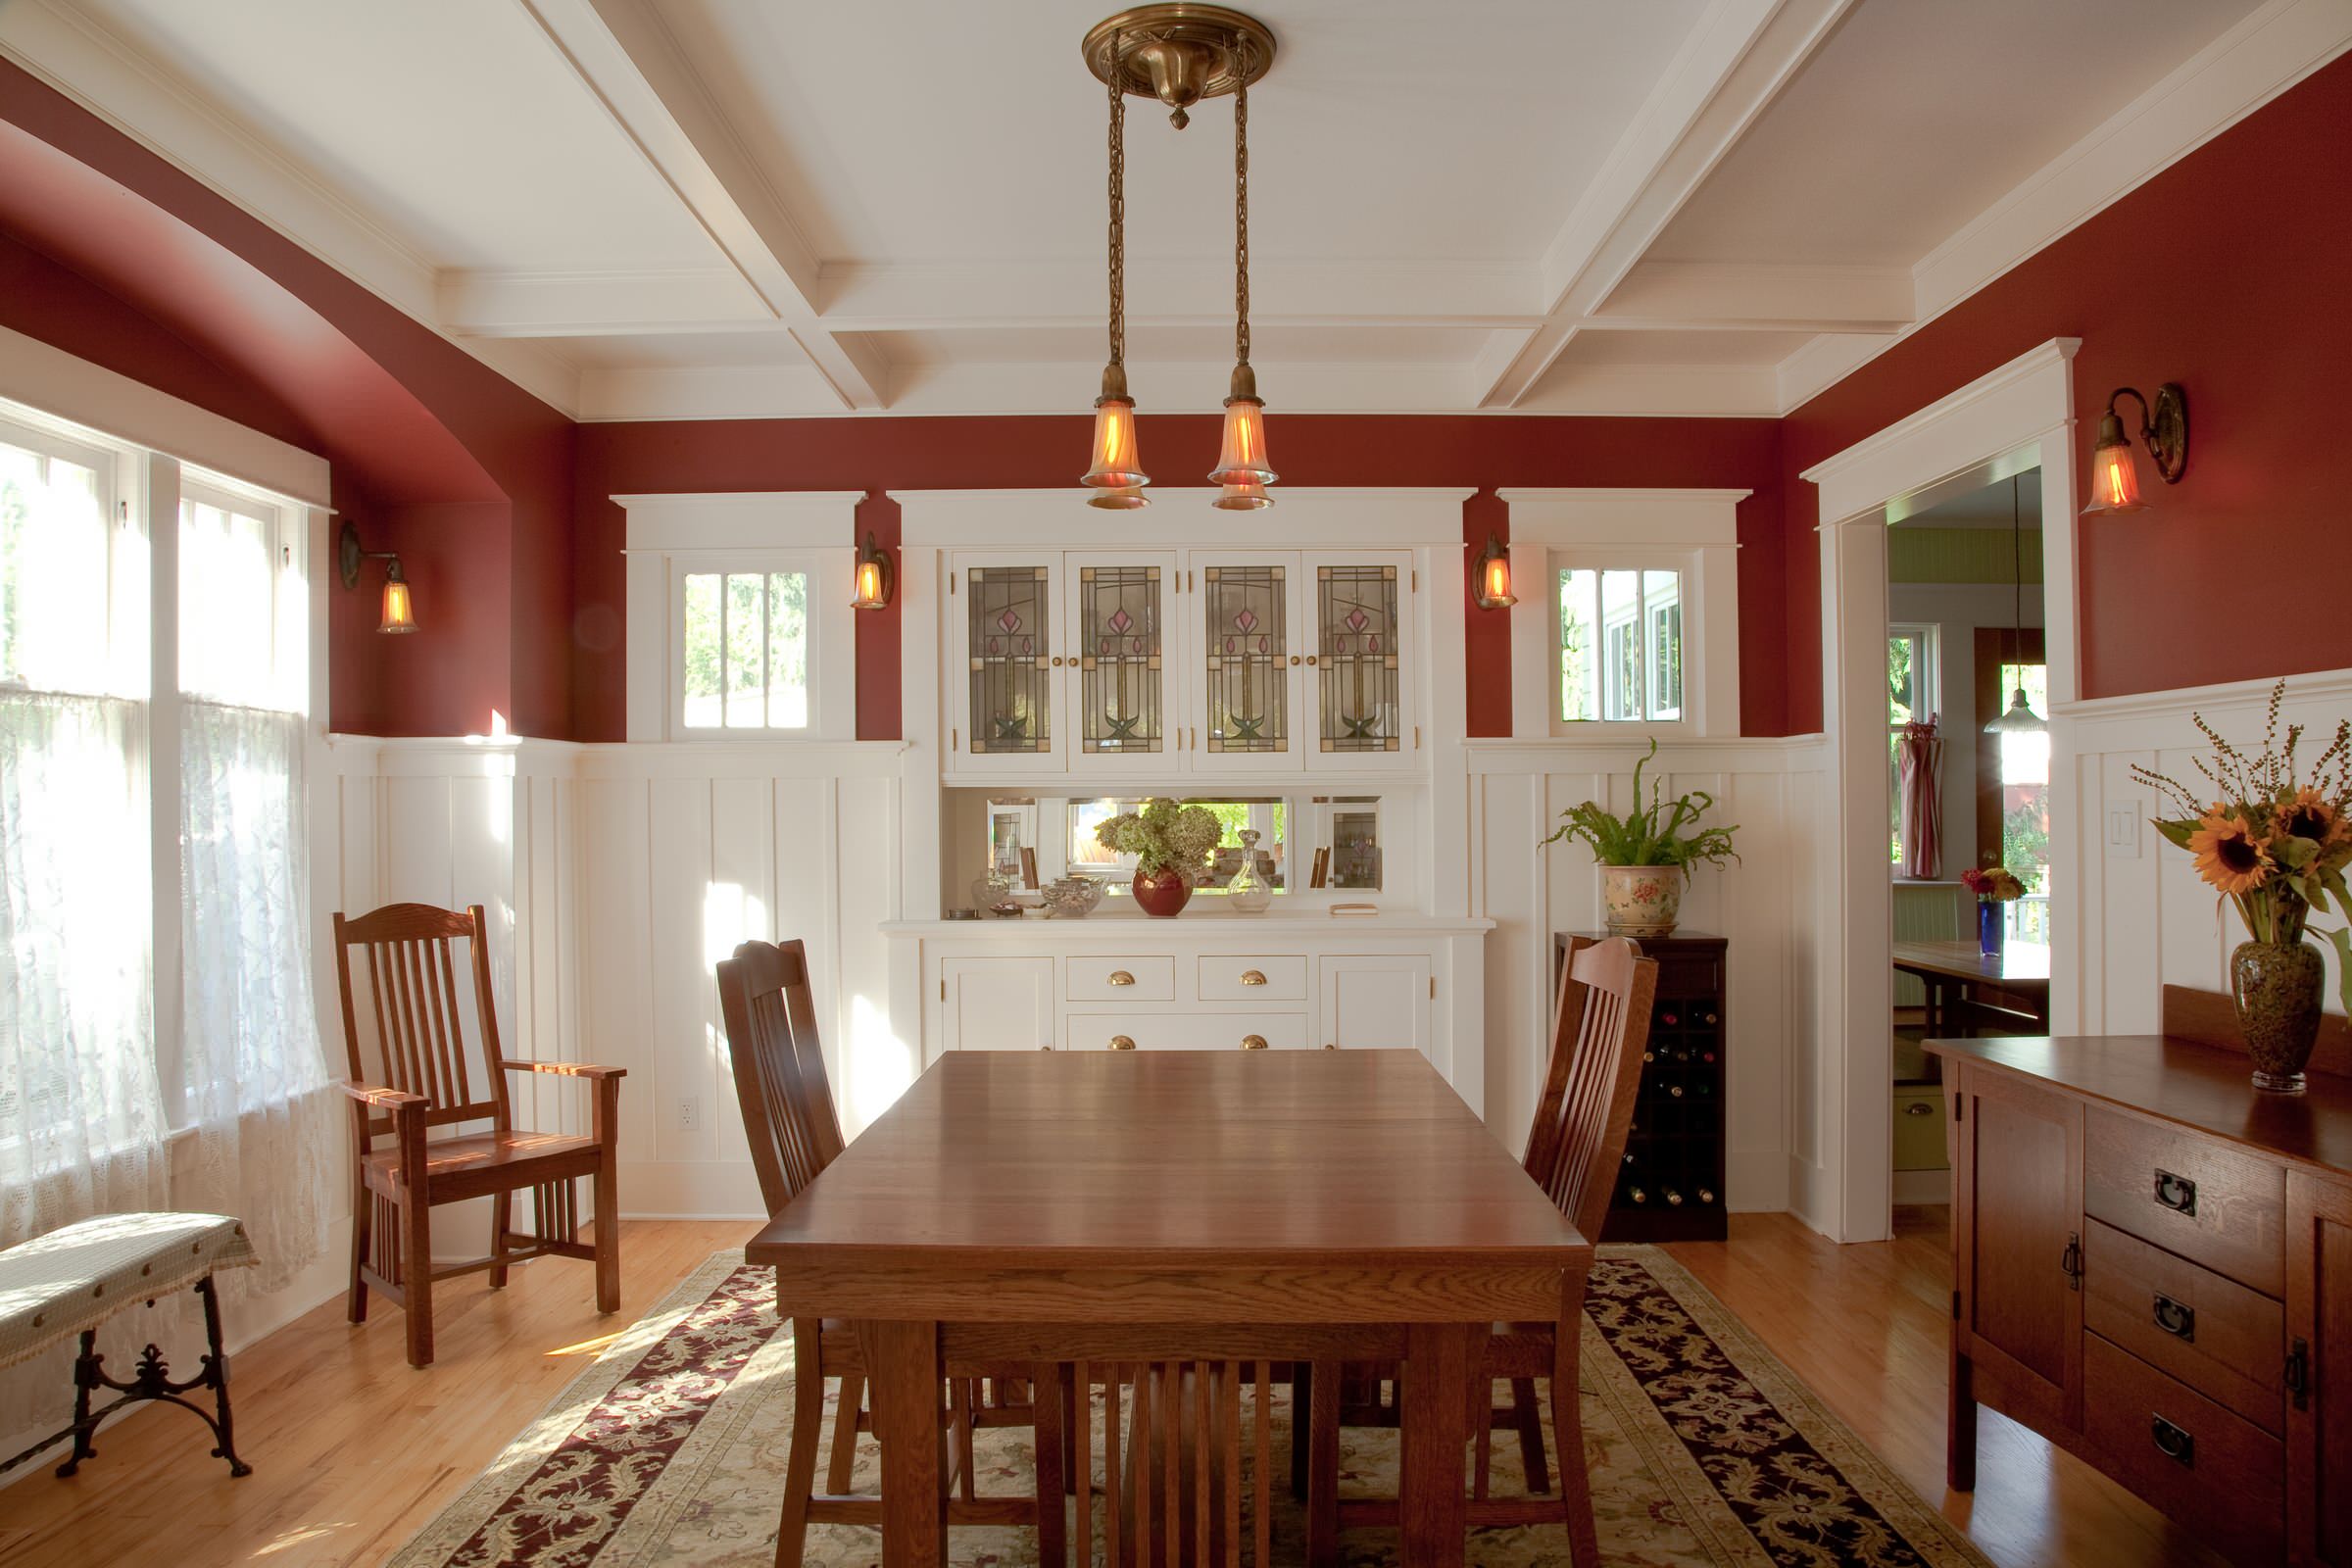 75 Beautiful Large Dining Room Pictures Ideas April 2021 Houzz